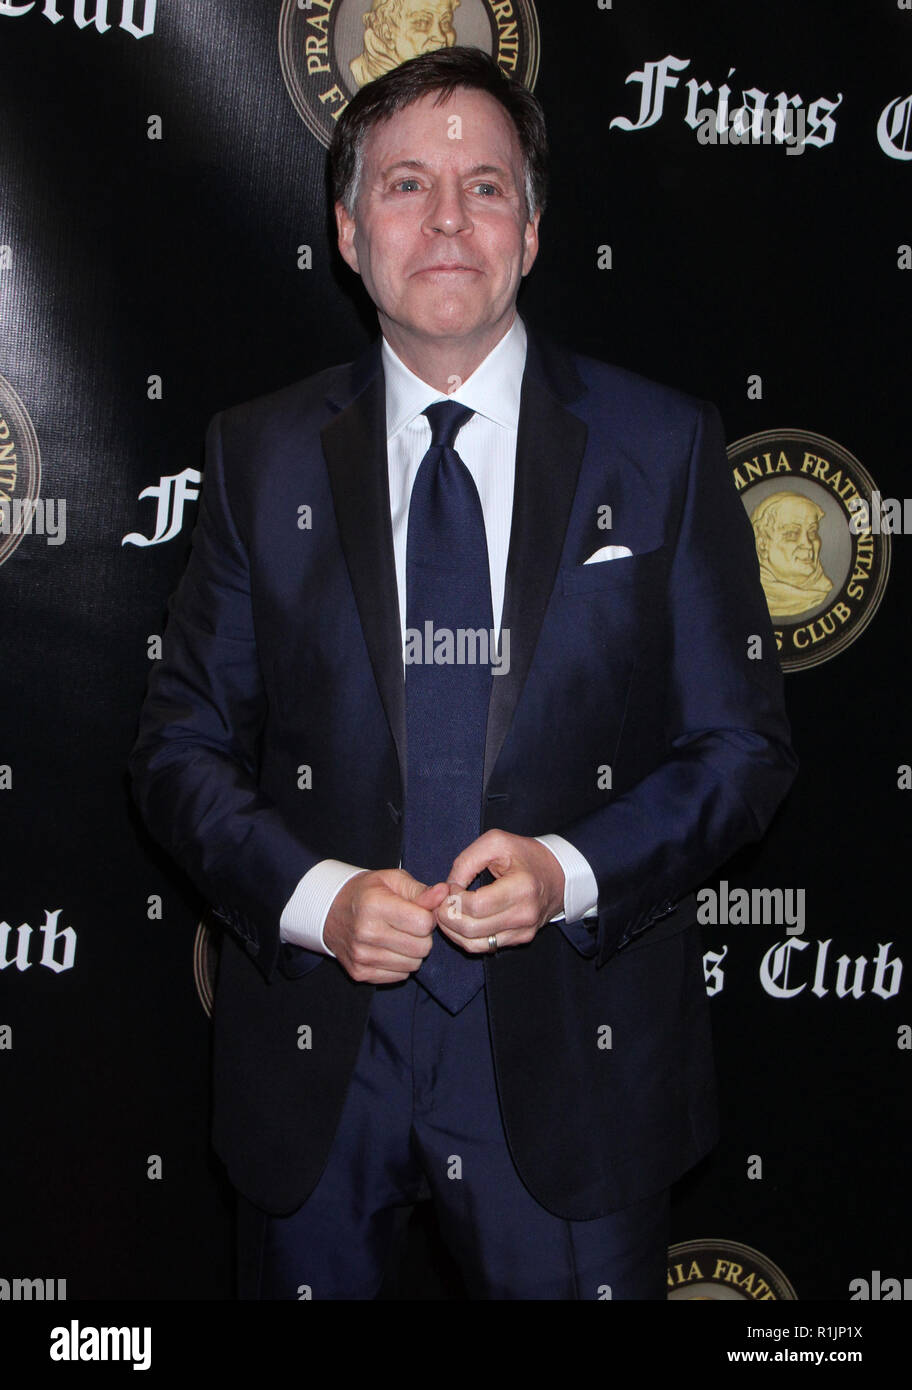 New York, NY, USA. 12th Nov, 2018. Bob Costas at The Friars Club event honoring Billy Crystal with the Entertainment Icon Award at the Ziegfeld Ballroom in New York City on November 12, 2018. Credit: Rw/Media Punch/Alamy Live News Stock Photo